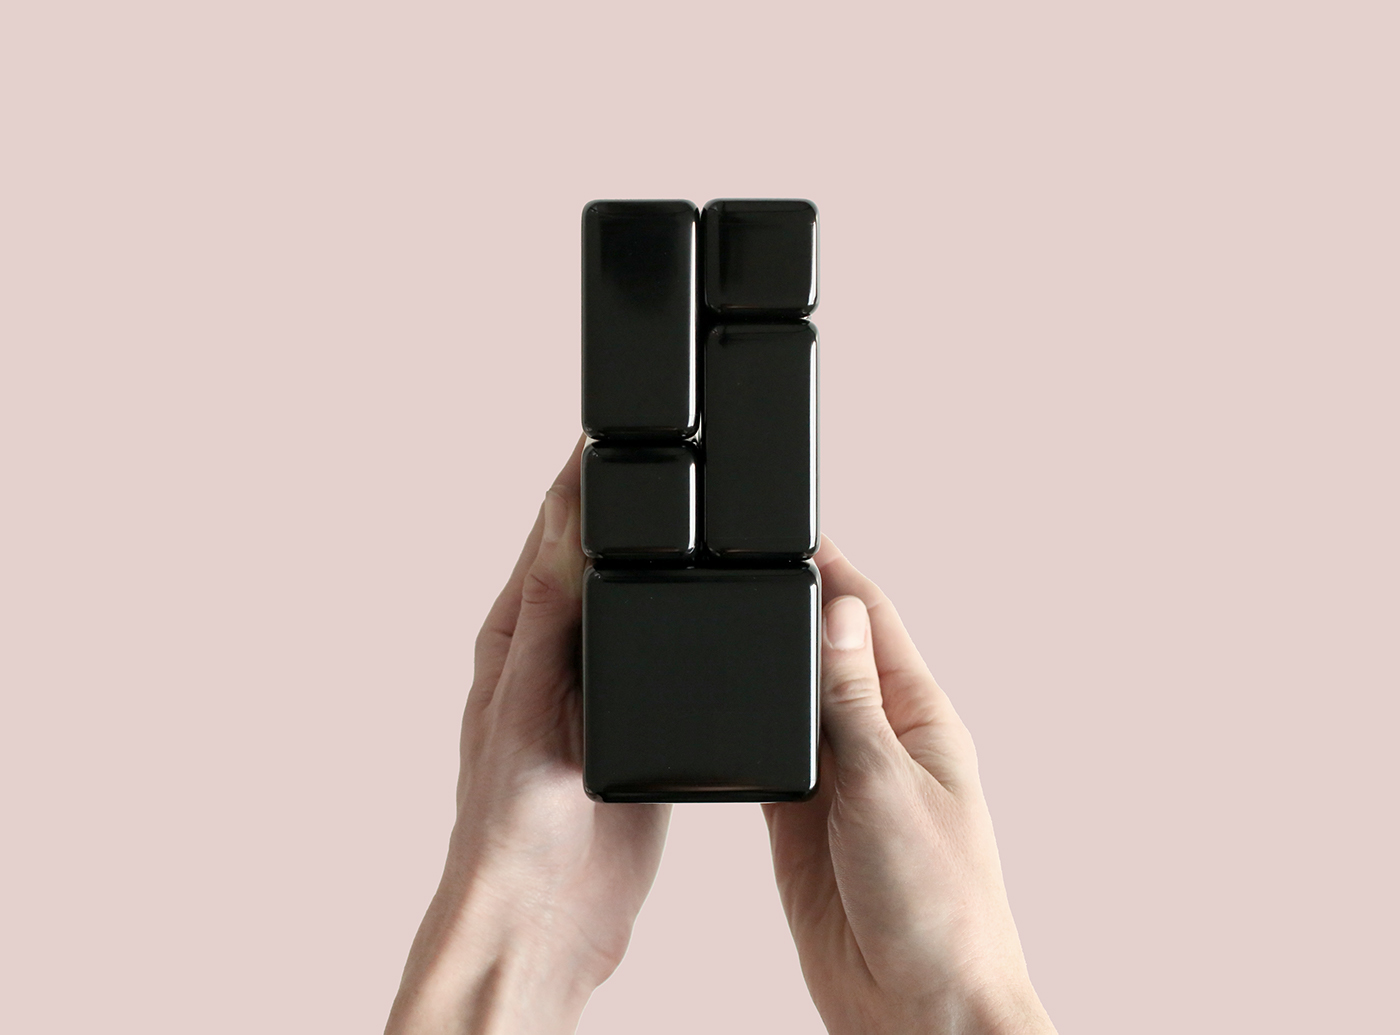 award trophy gloss modular minimal gloss black soft Magnetic rounded industrial design 